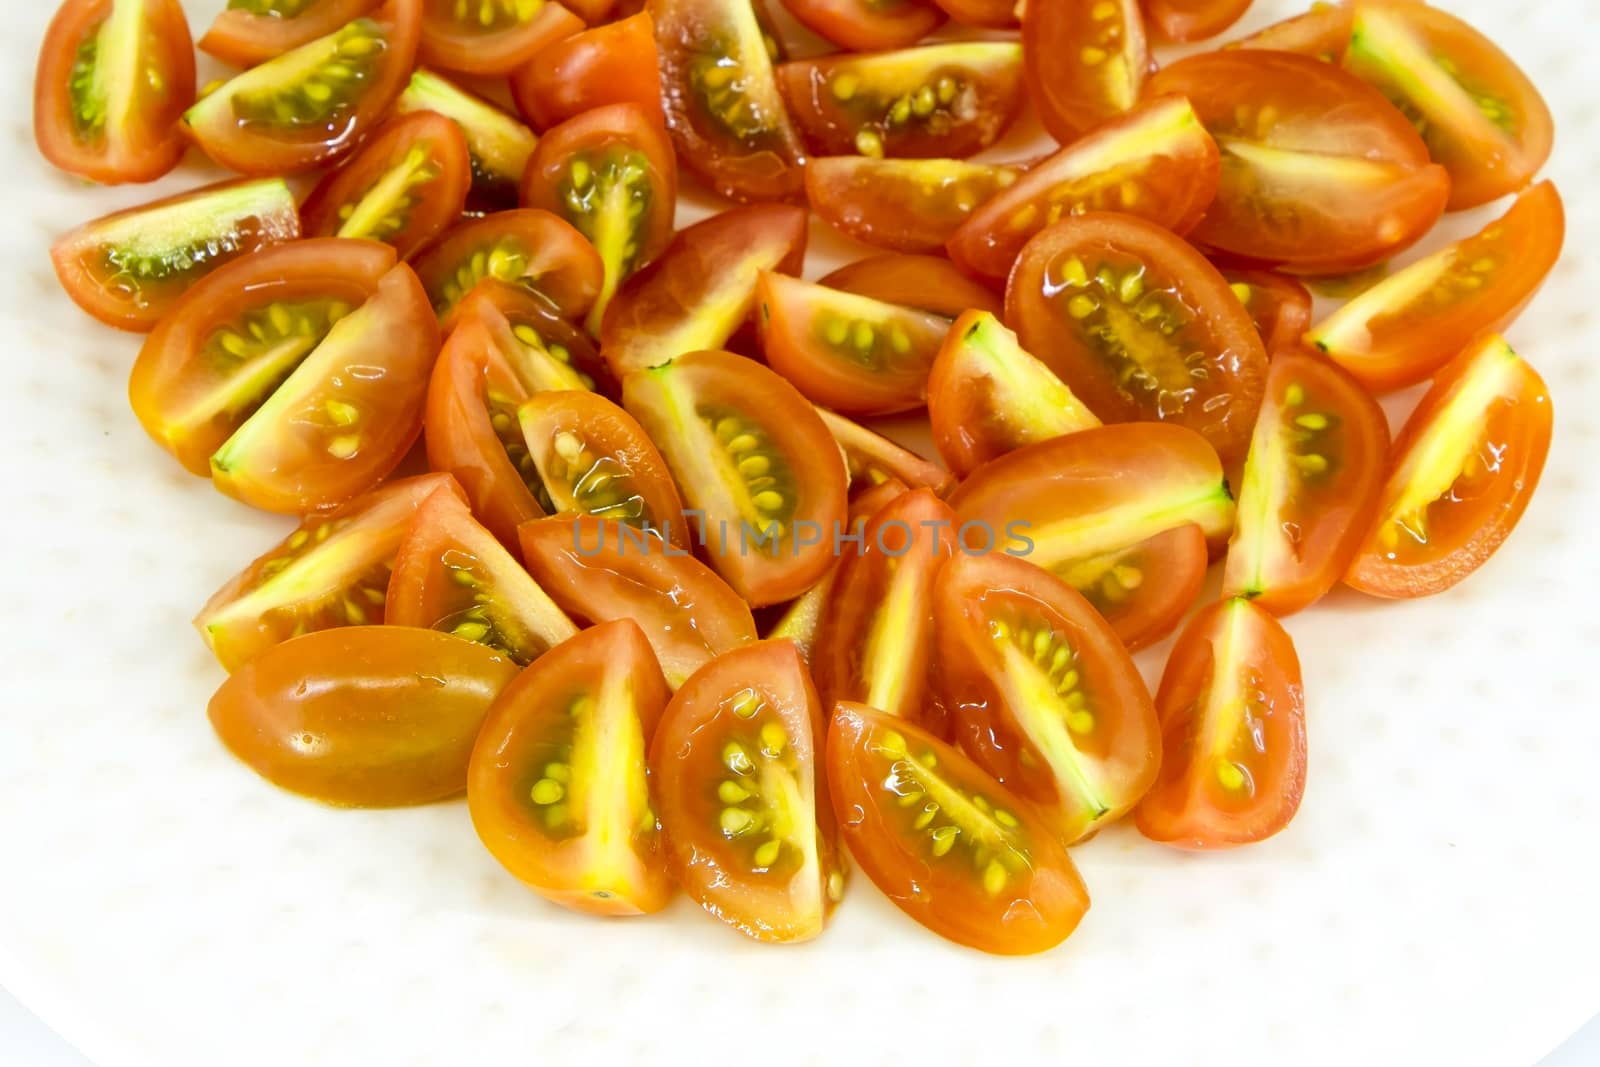 slices of cherry  tomatoes isolate on white background